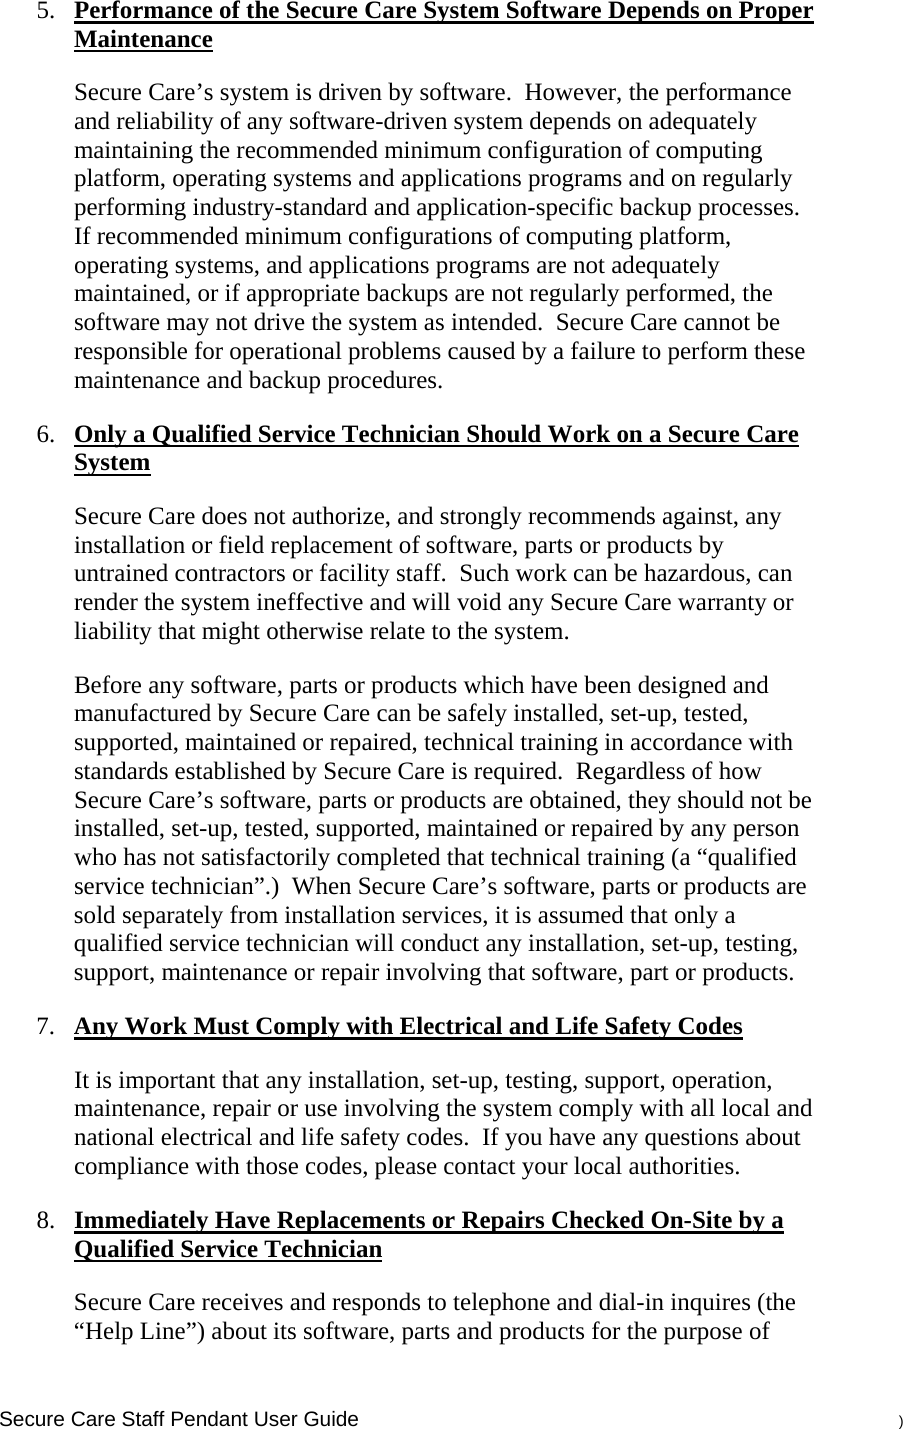    Secure Care Staff Pendant User Guide    ) 5. Performance of the Secure Care System Software Depends on Proper Maintenance Secure Care’s system is driven by software.  However, the performance and reliability of any software-driven system depends on adequately maintaining the recommended minimum configuration of computing platform, operating systems and applications programs and on regularly performing industry-standard and application-specific backup processes.  If recommended minimum configurations of computing platform, operating systems, and applications programs are not adequately maintained, or if appropriate backups are not regularly performed, the software may not drive the system as intended.  Secure Care cannot be responsible for operational problems caused by a failure to perform these maintenance and backup procedures. 6. Only a Qualified Service Technician Should Work on a Secure Care System Secure Care does not authorize, and strongly recommends against, any installation or field replacement of software, parts or products by untrained contractors or facility staff.  Such work can be hazardous, can render the system ineffective and will void any Secure Care warranty or liability that might otherwise relate to the system.   Before any software, parts or products which have been designed and manufactured by Secure Care can be safely installed, set-up, tested, supported, maintained or repaired, technical training in accordance with standards established by Secure Care is required.  Regardless of how Secure Care’s software, parts or products are obtained, they should not be installed, set-up, tested, supported, maintained or repaired by any person who has not satisfactorily completed that technical training (a “qualified service technician”.)  When Secure Care’s software, parts or products are sold separately from installation services, it is assumed that only a qualified service technician will conduct any installation, set-up, testing, support, maintenance or repair involving that software, part or products.  7. Any Work Must Comply with Electrical and Life Safety Codes It is important that any installation, set-up, testing, support, operation, maintenance, repair or use involving the system comply with all local and national electrical and life safety codes.  If you have any questions about compliance with those codes, please contact your local authorities. 8. Immediately Have Replacements or Repairs Checked On-Site by a Qualified Service Technician Secure Care receives and responds to telephone and dial-in inquires (the “Help Line”) about its software, parts and products for the purpose of 